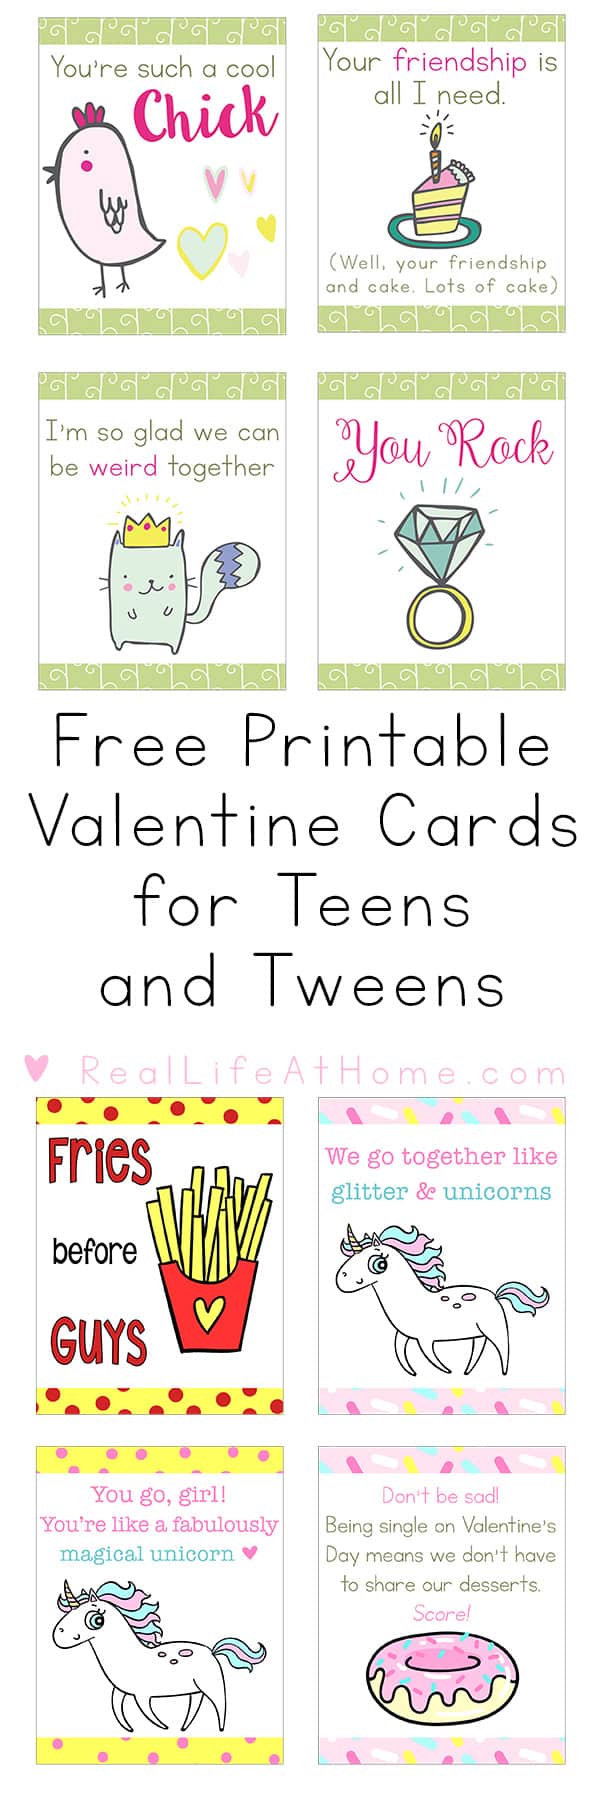 Looking for some fun and quirky valentine cards for kids? This set of eight funny and free printable valentine cards for teens and tweens (or even younger kids or adults) is sure to bring about some smiles and maybe even a giggle or two. | Real Life at Home